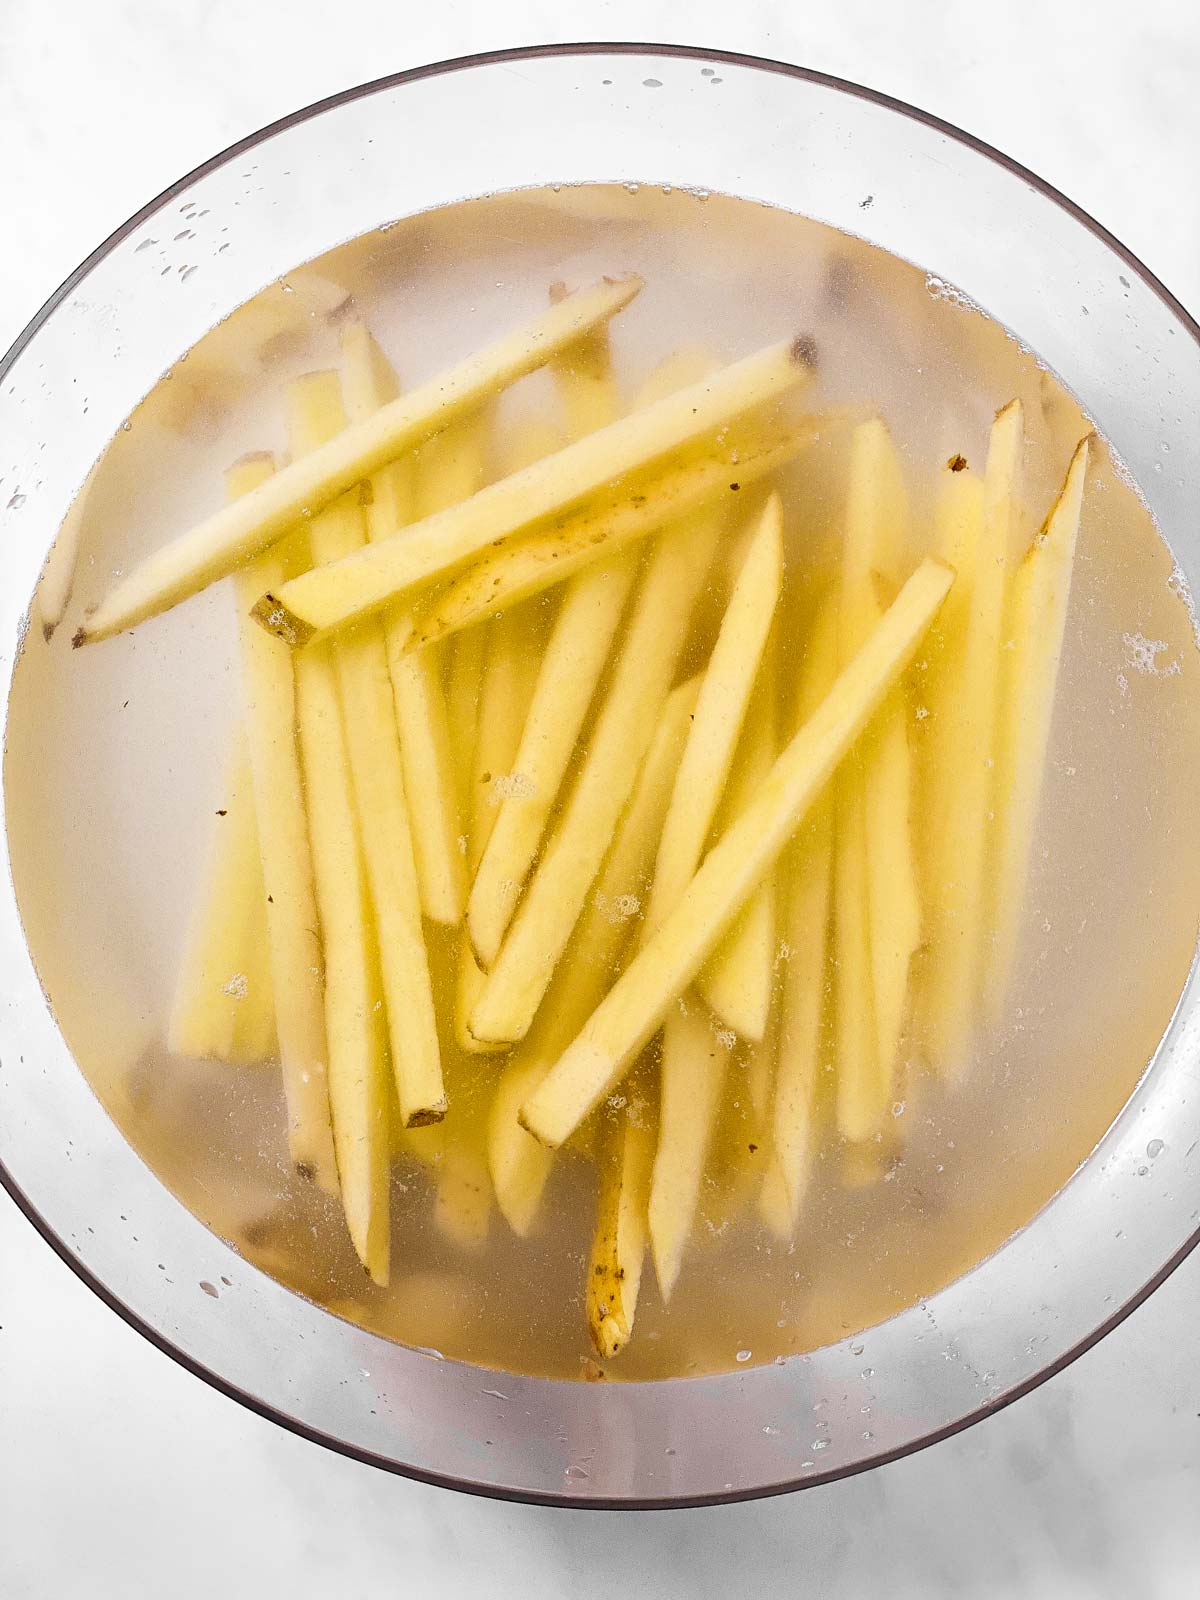 uncooked french fries in glass bowl filled with water